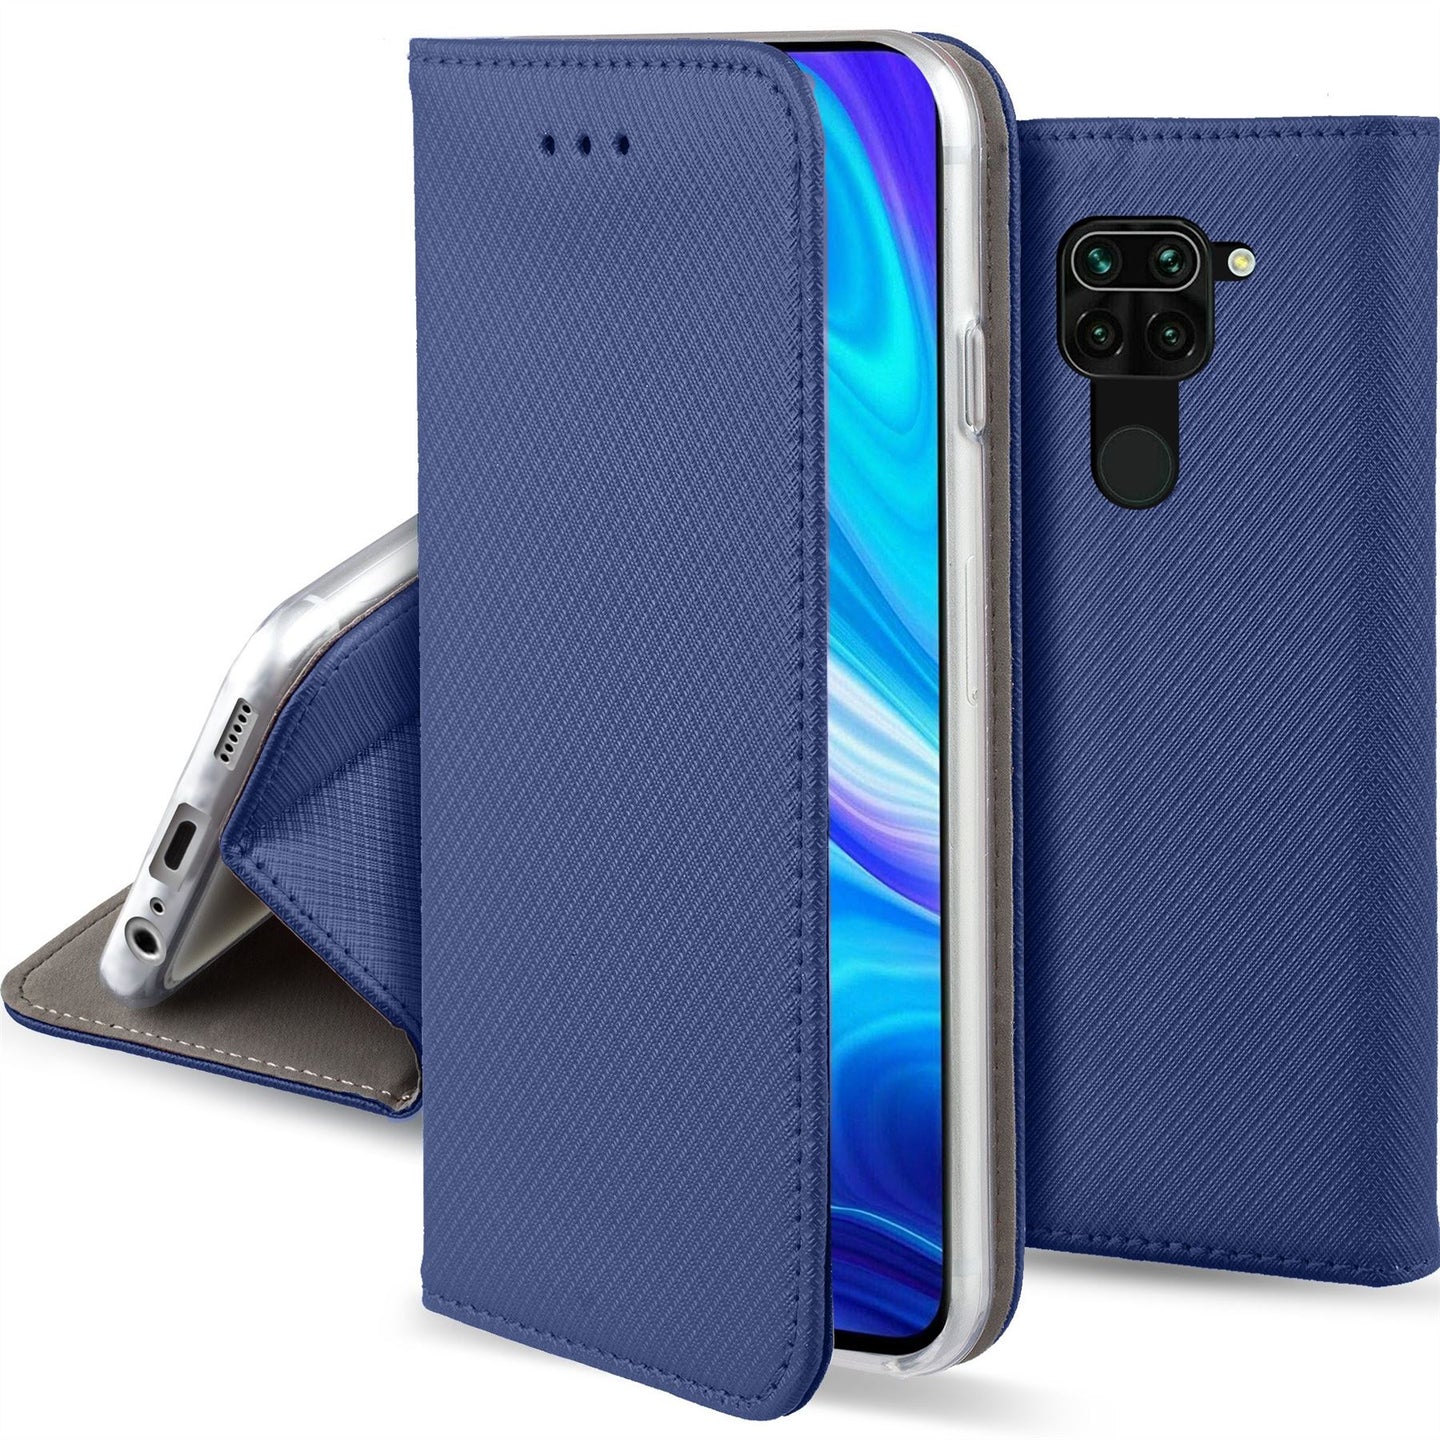 Moozy Case Flip Cover for Xiaomi Redmi Note 9, Dark Blue - Smart Magnetic Flip Case with Card Holder and Stand